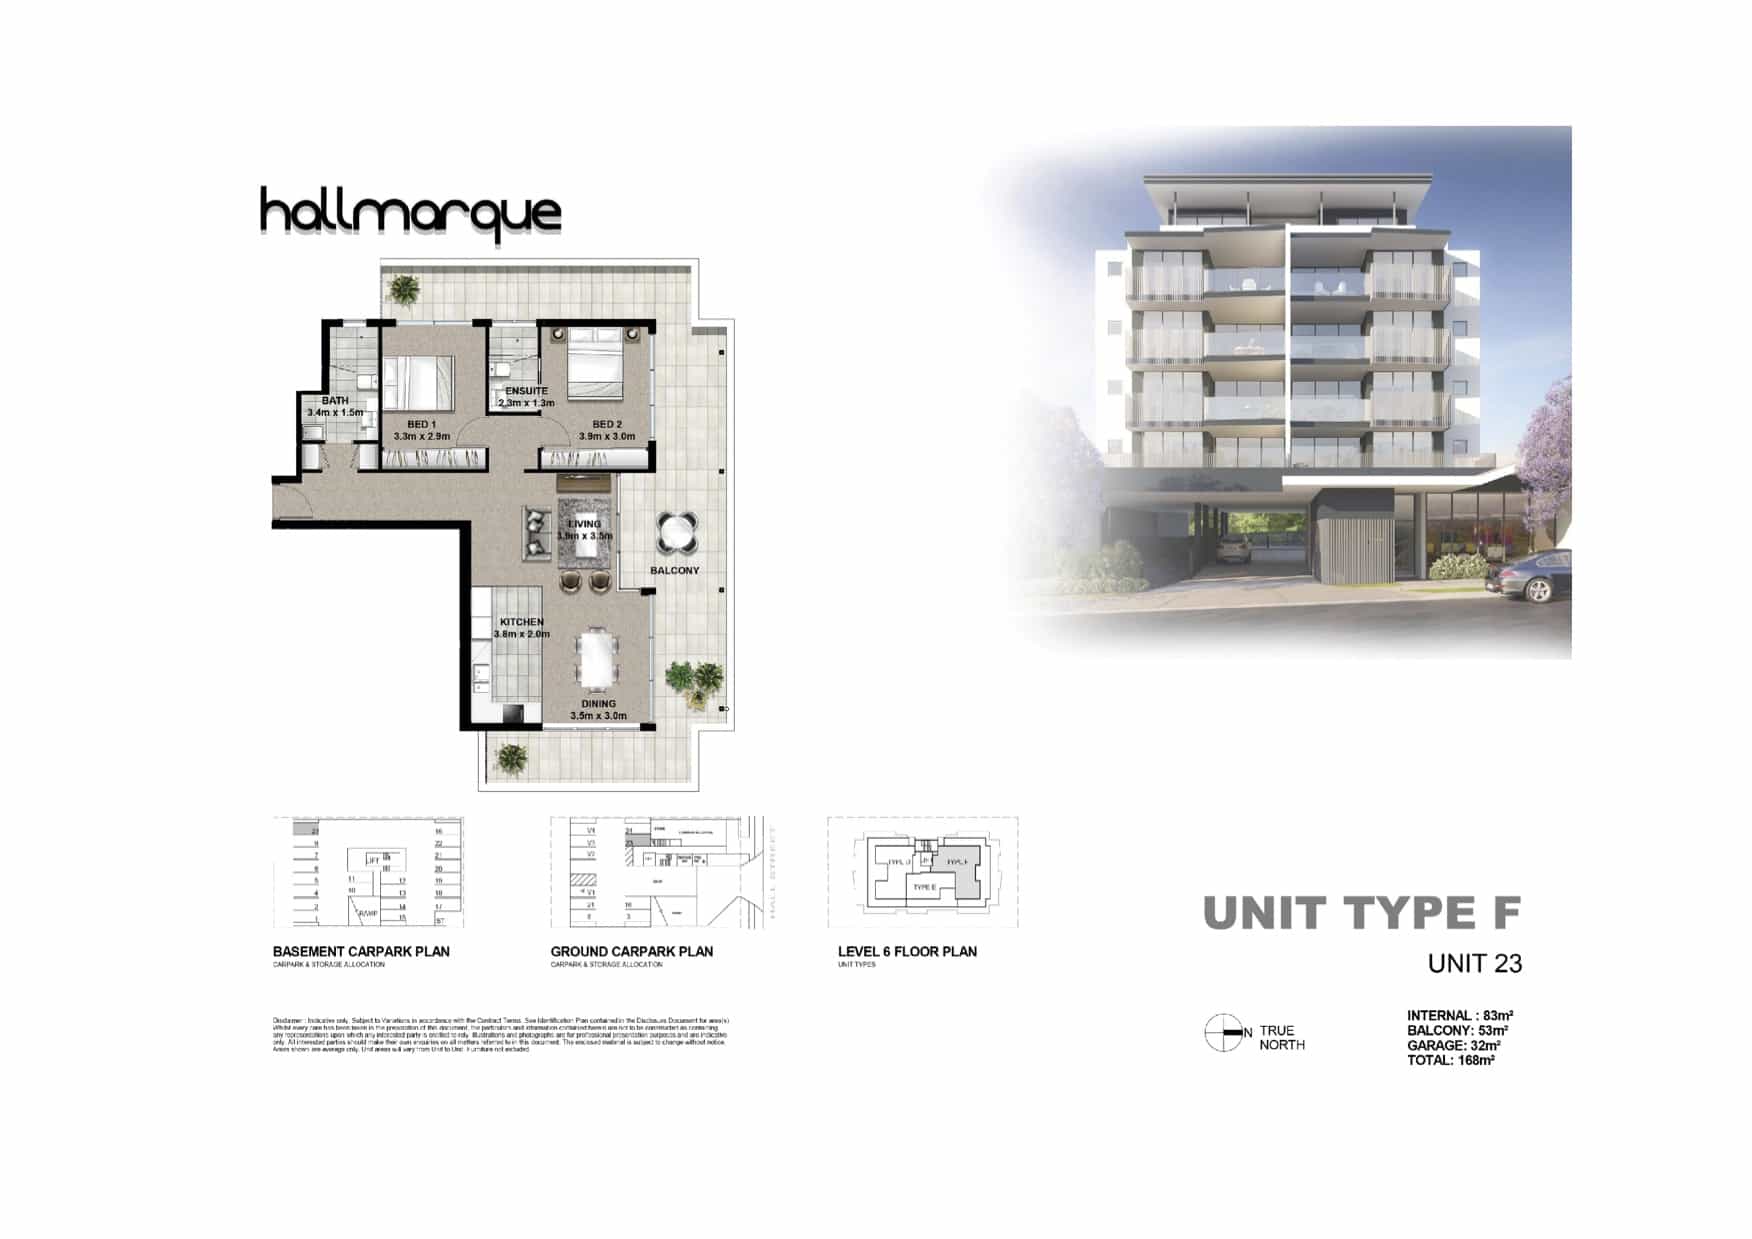 Hallmarque 2 Bedroom Apartment Brisbane with wraparound balcony access from bed and living